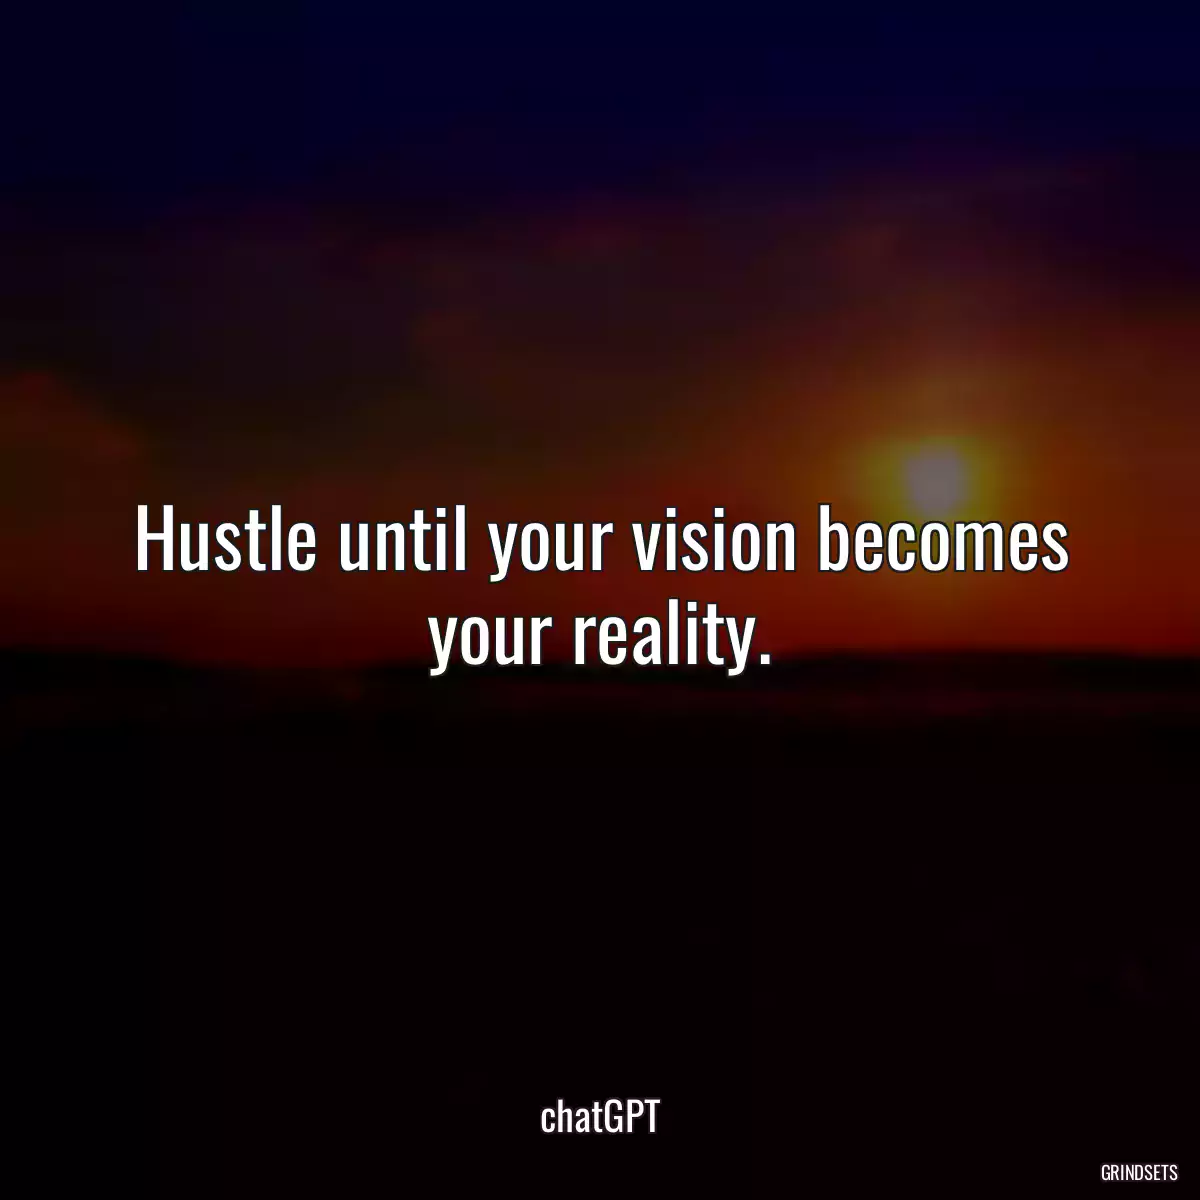 Hustle until your vision becomes your reality.